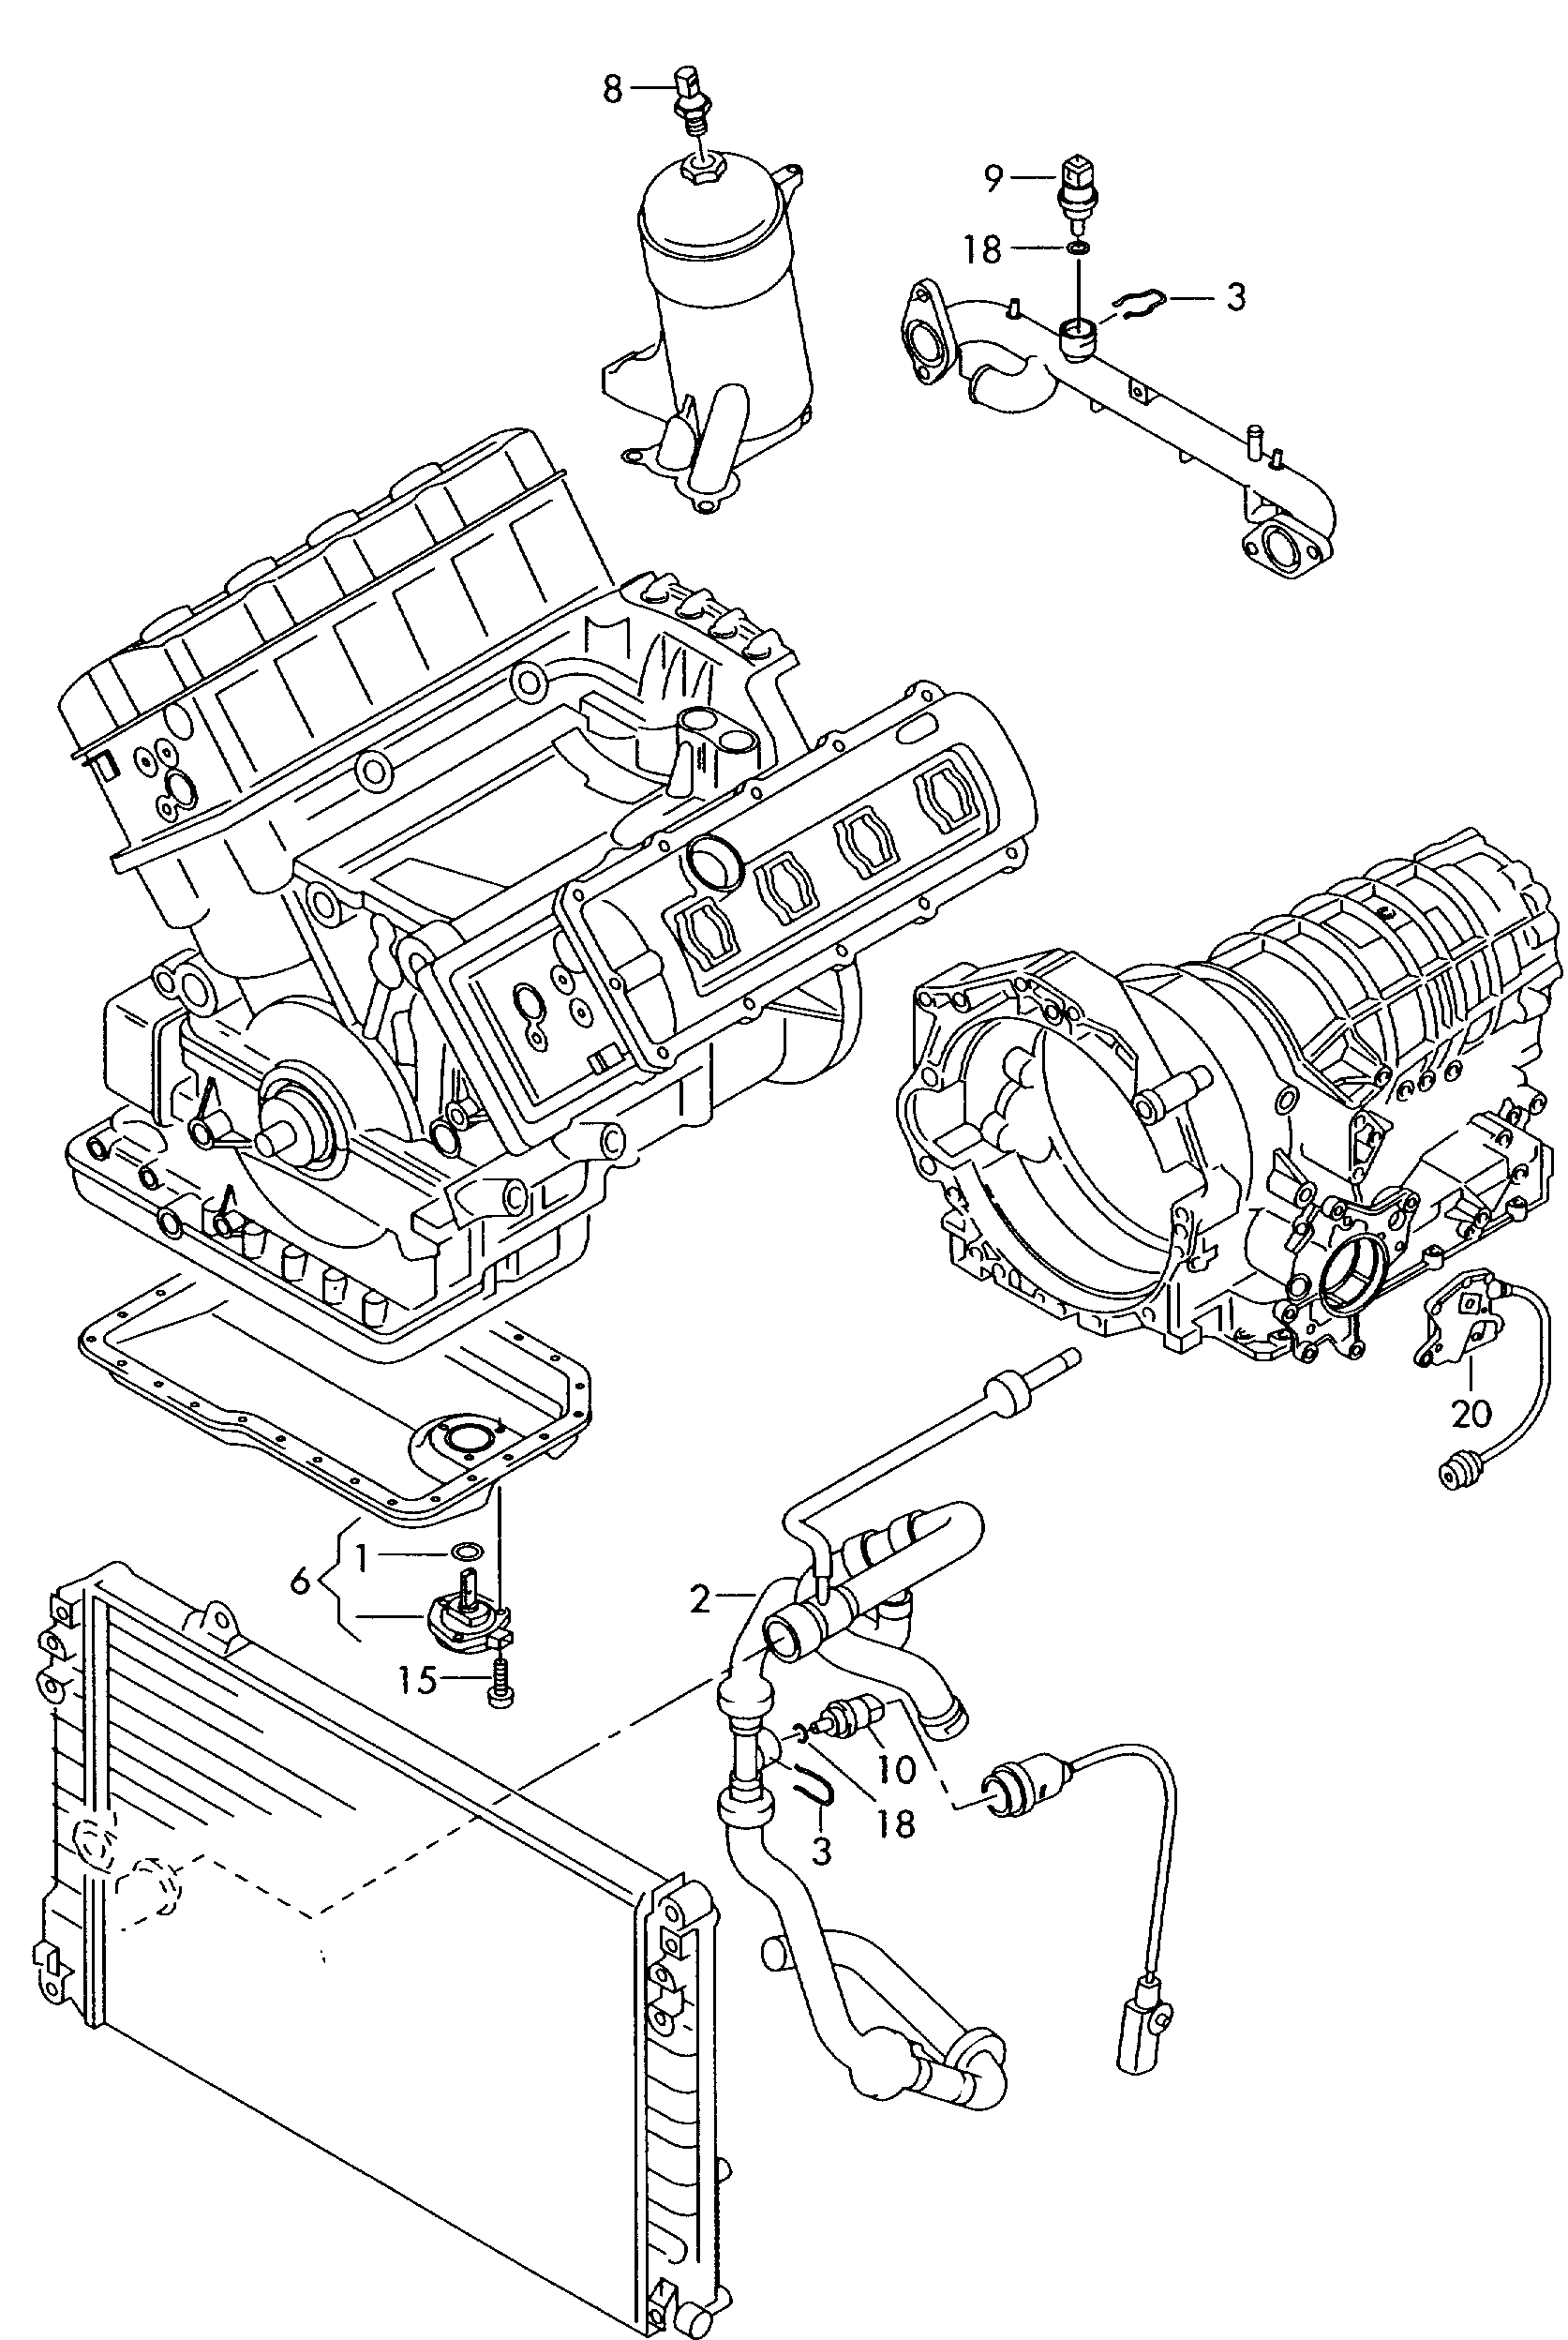 switches and senders on engine
and gearbox - Audi A6/S6/Avant quattro(A6Q)  